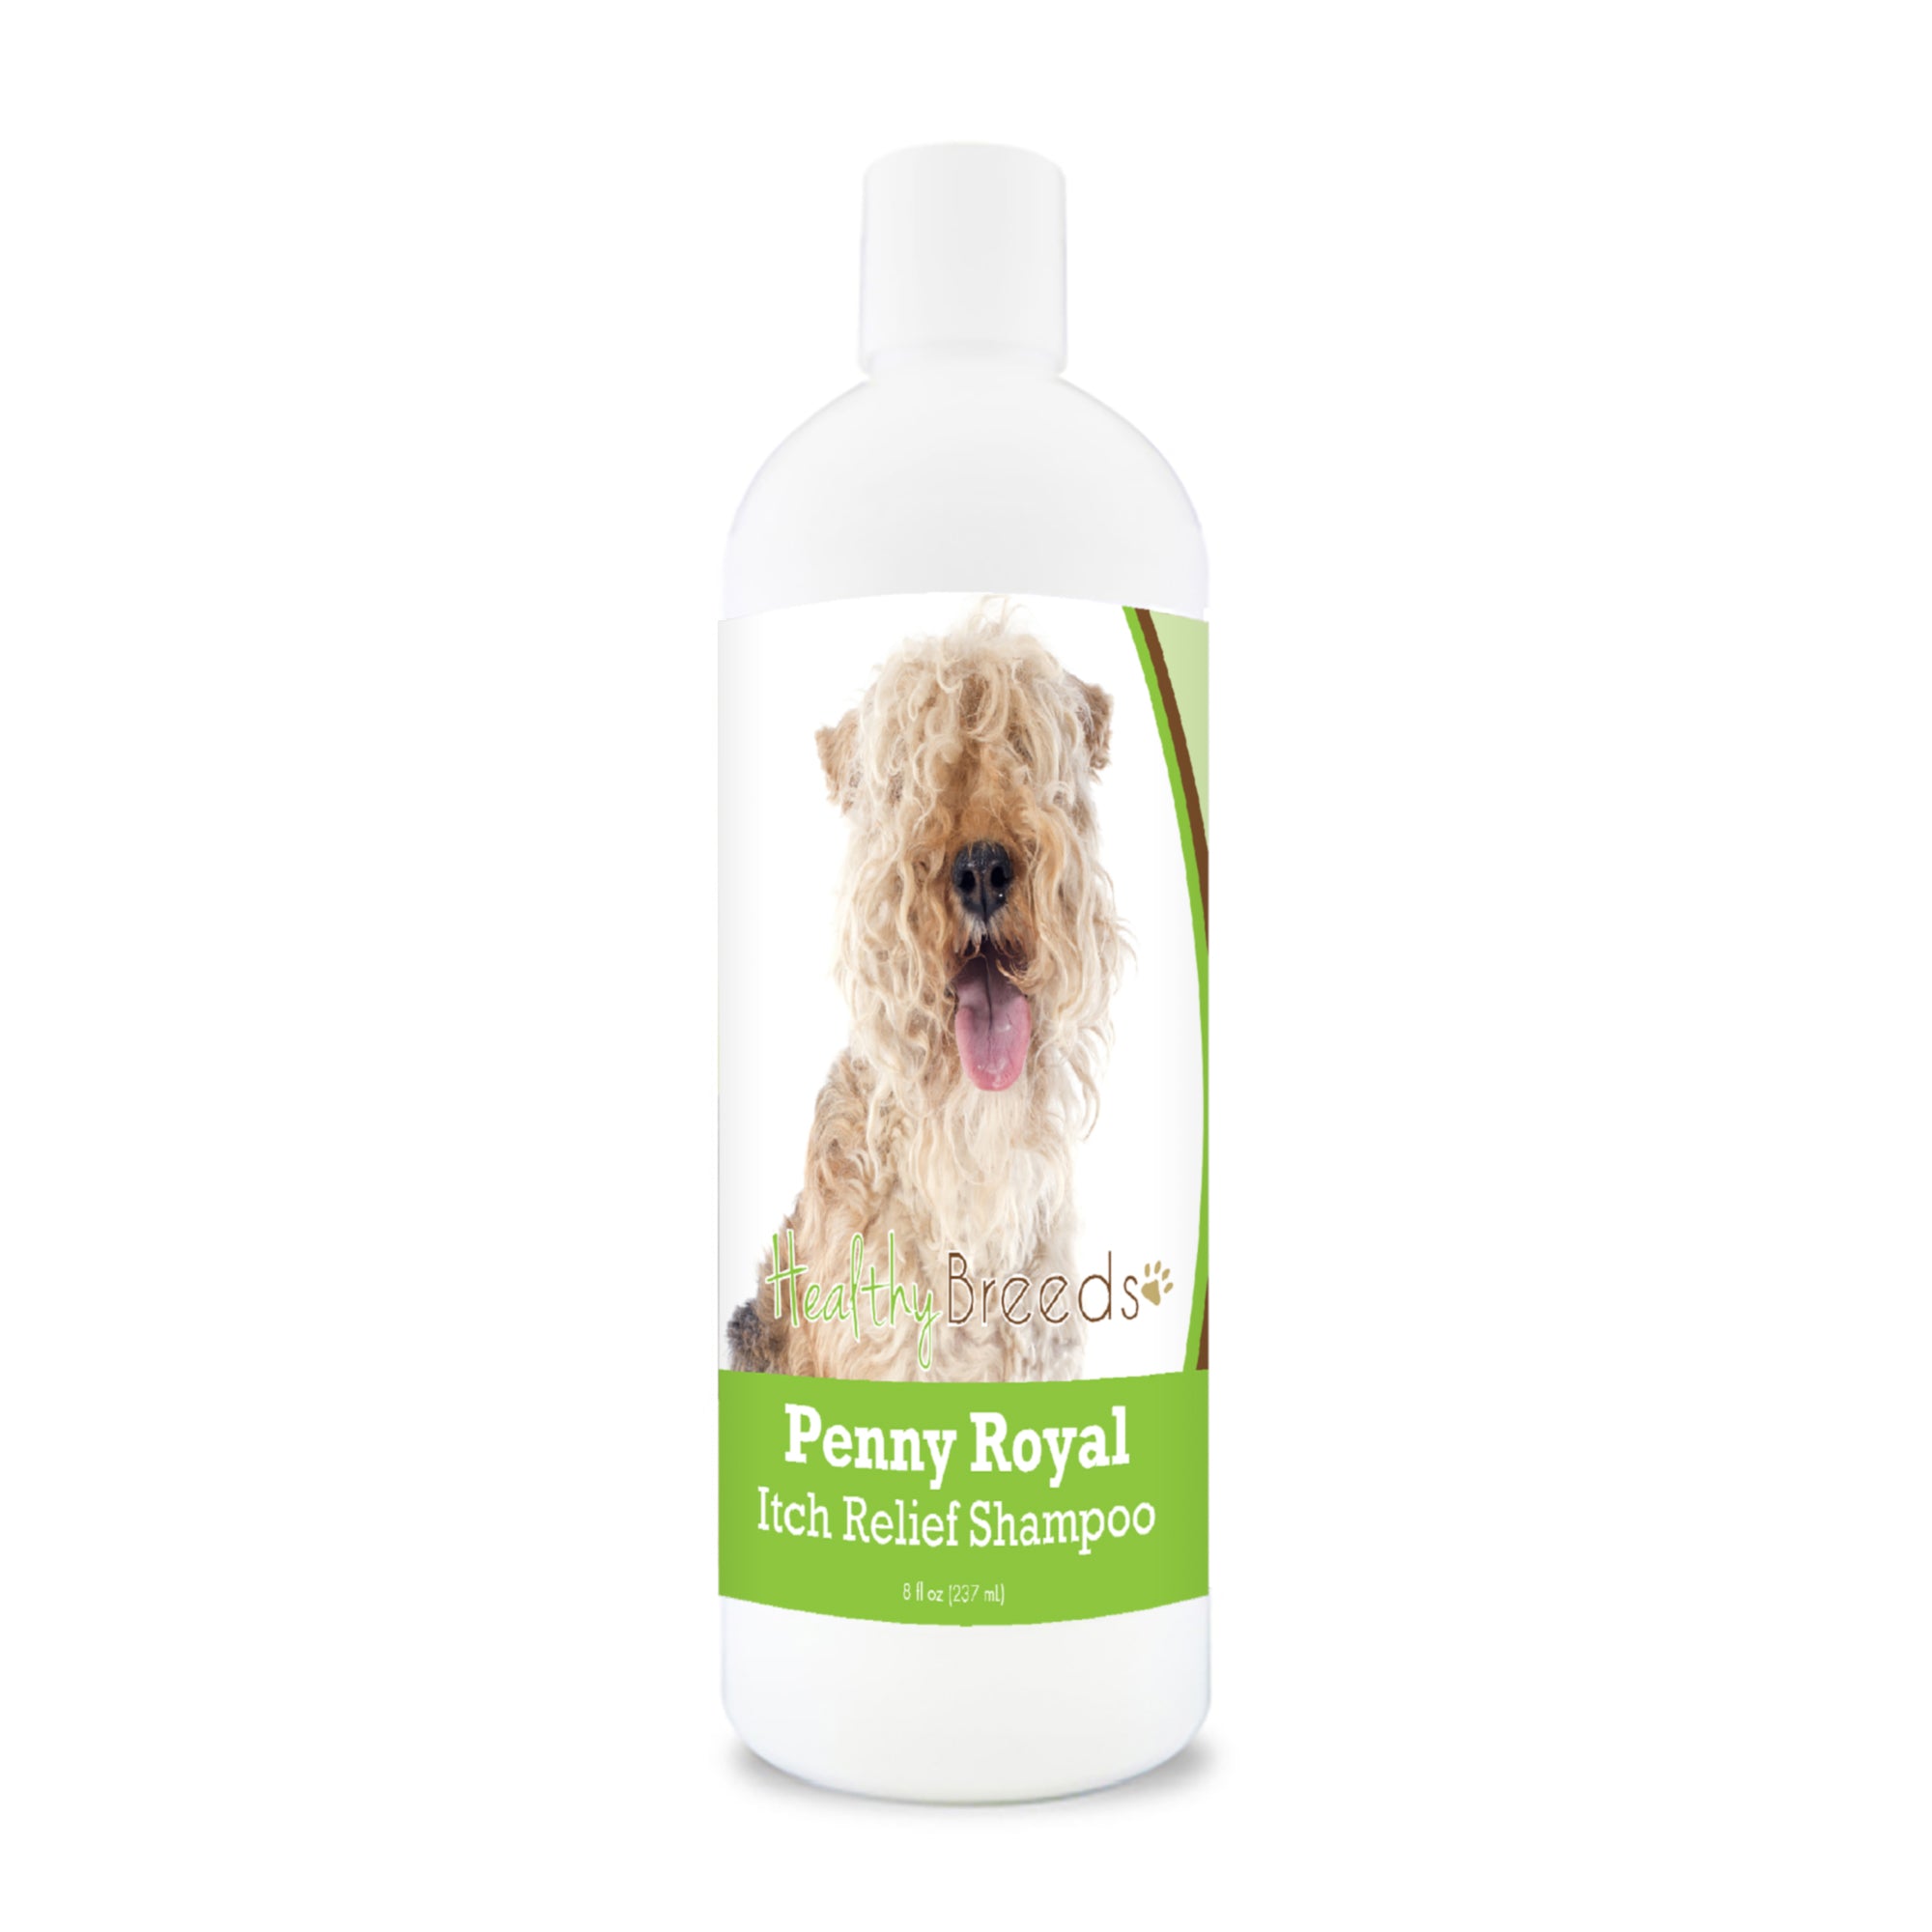 Lakeland Terrier Penny Royal Itch Relief Shampoo 8 oz